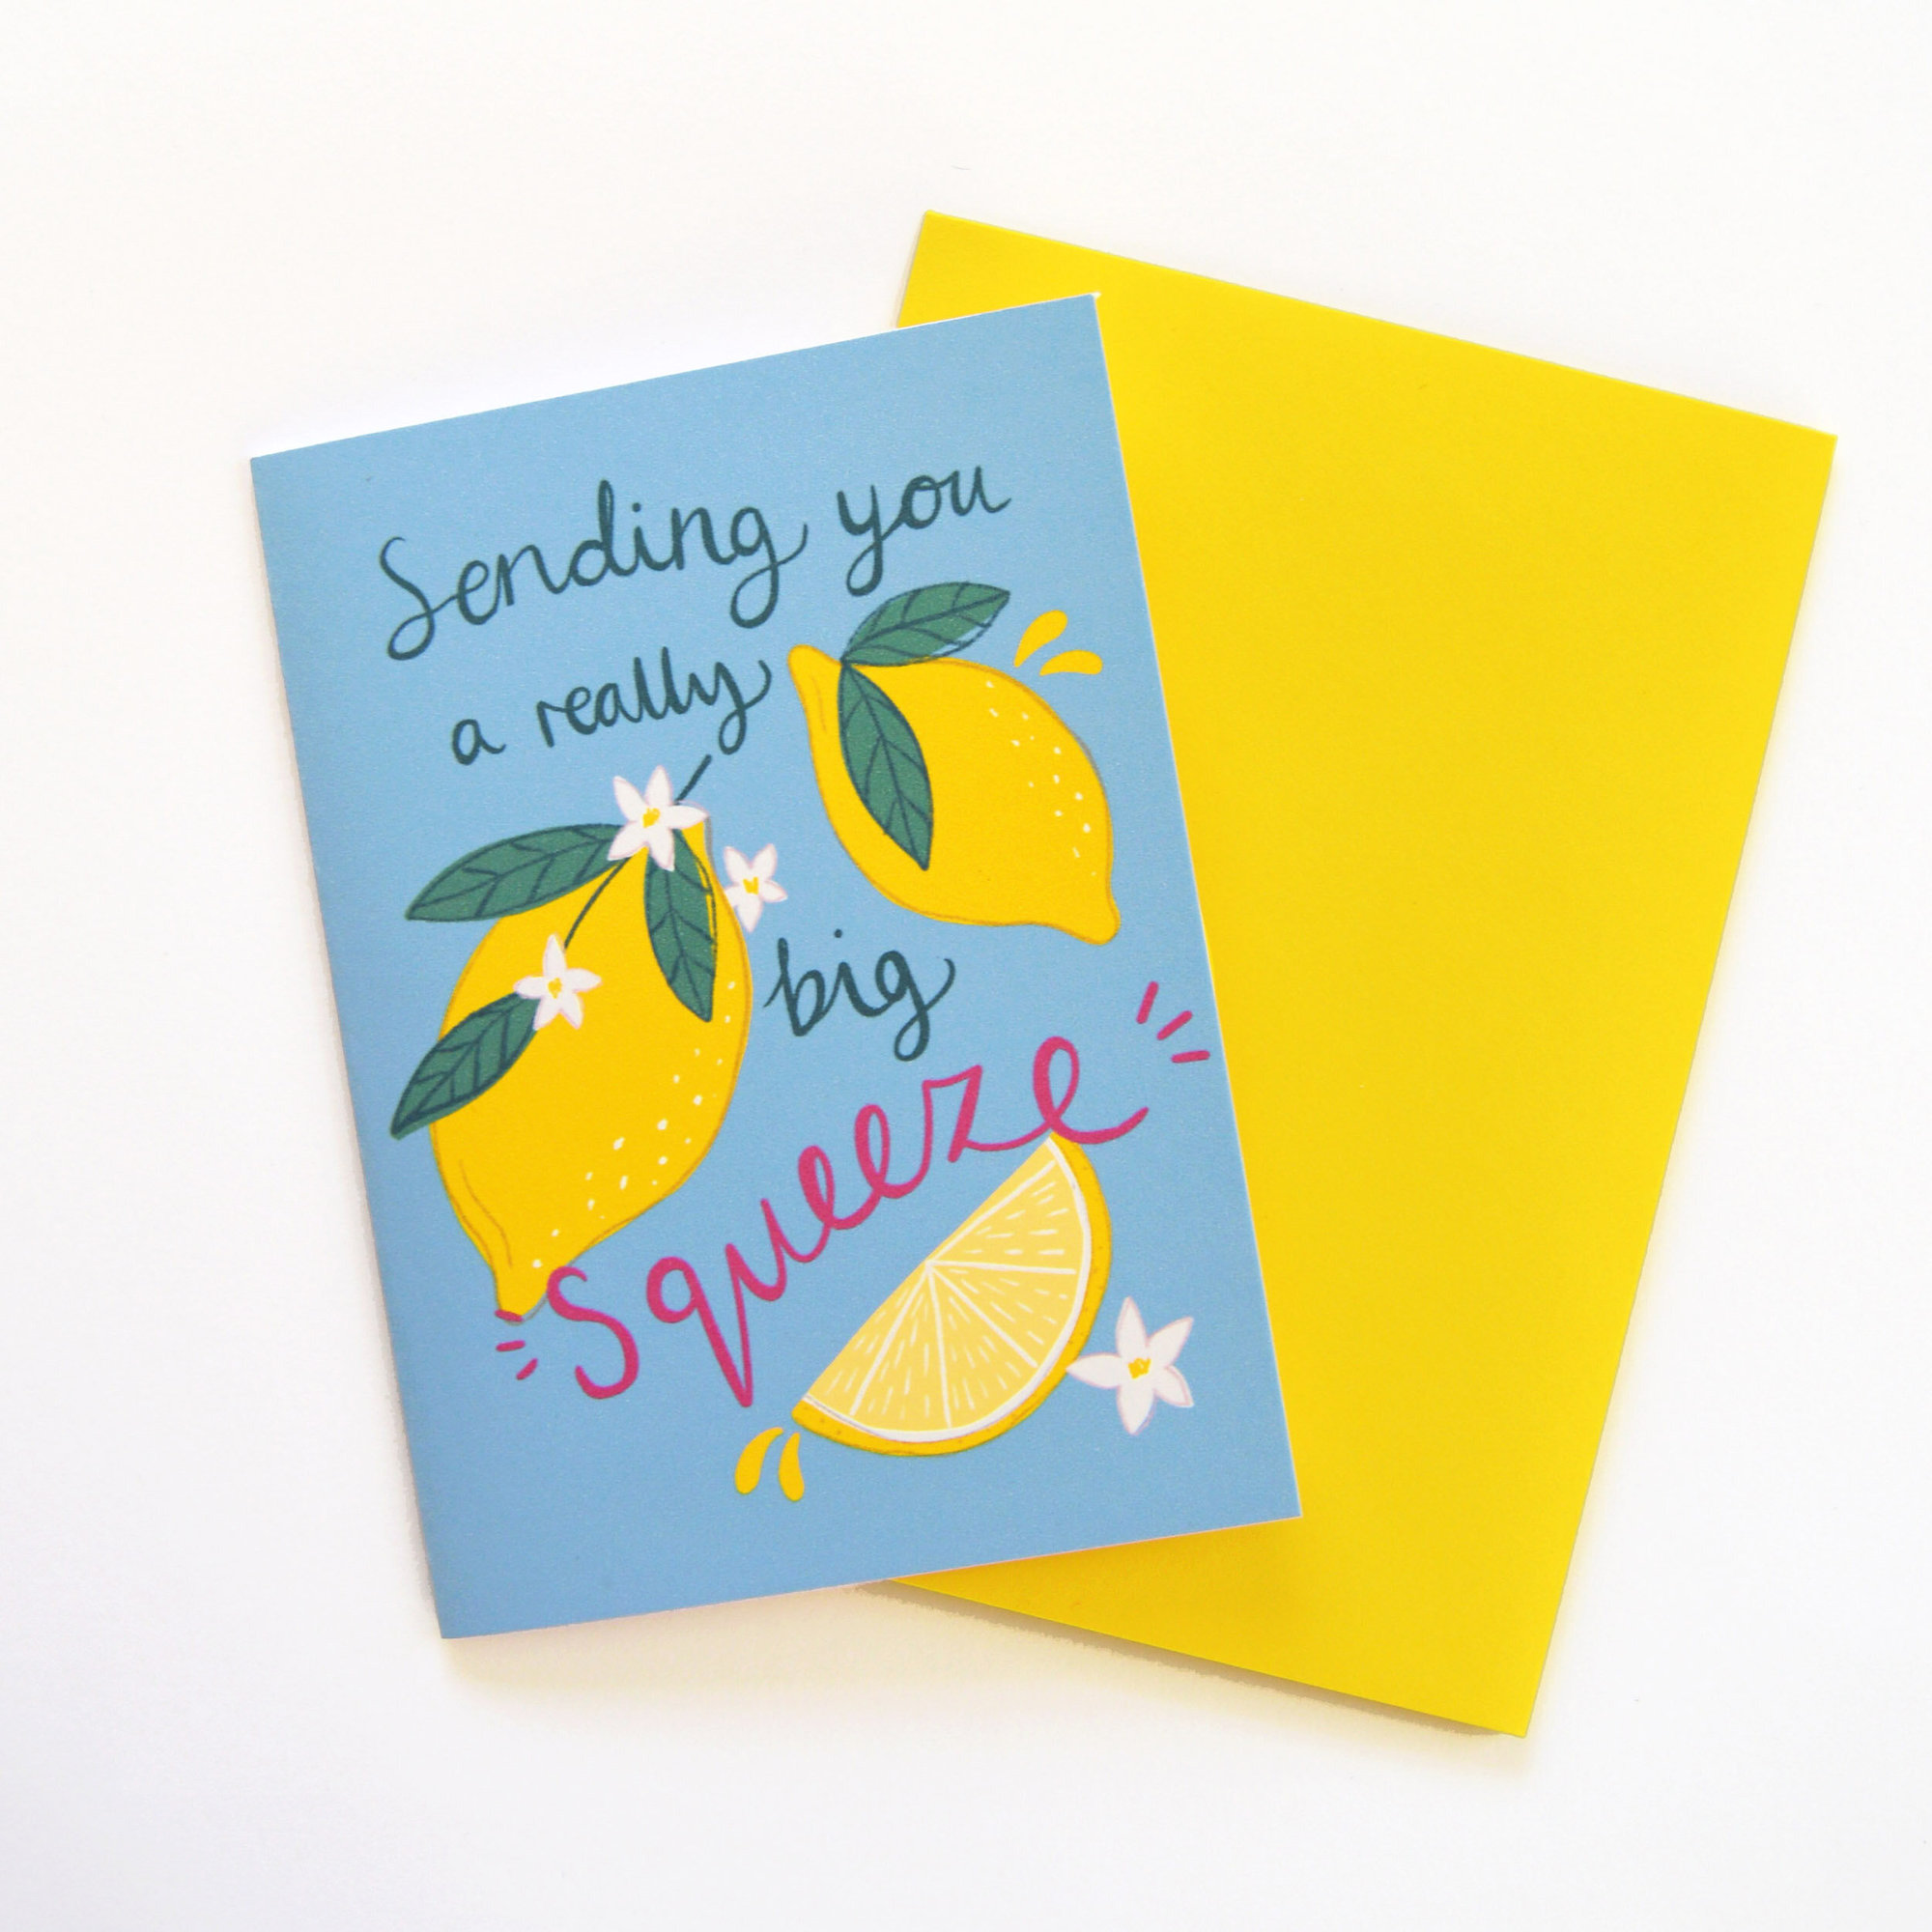 Sending You A Really Big Squeeze! 
Botanical Lemon Card - Just the card, Standard